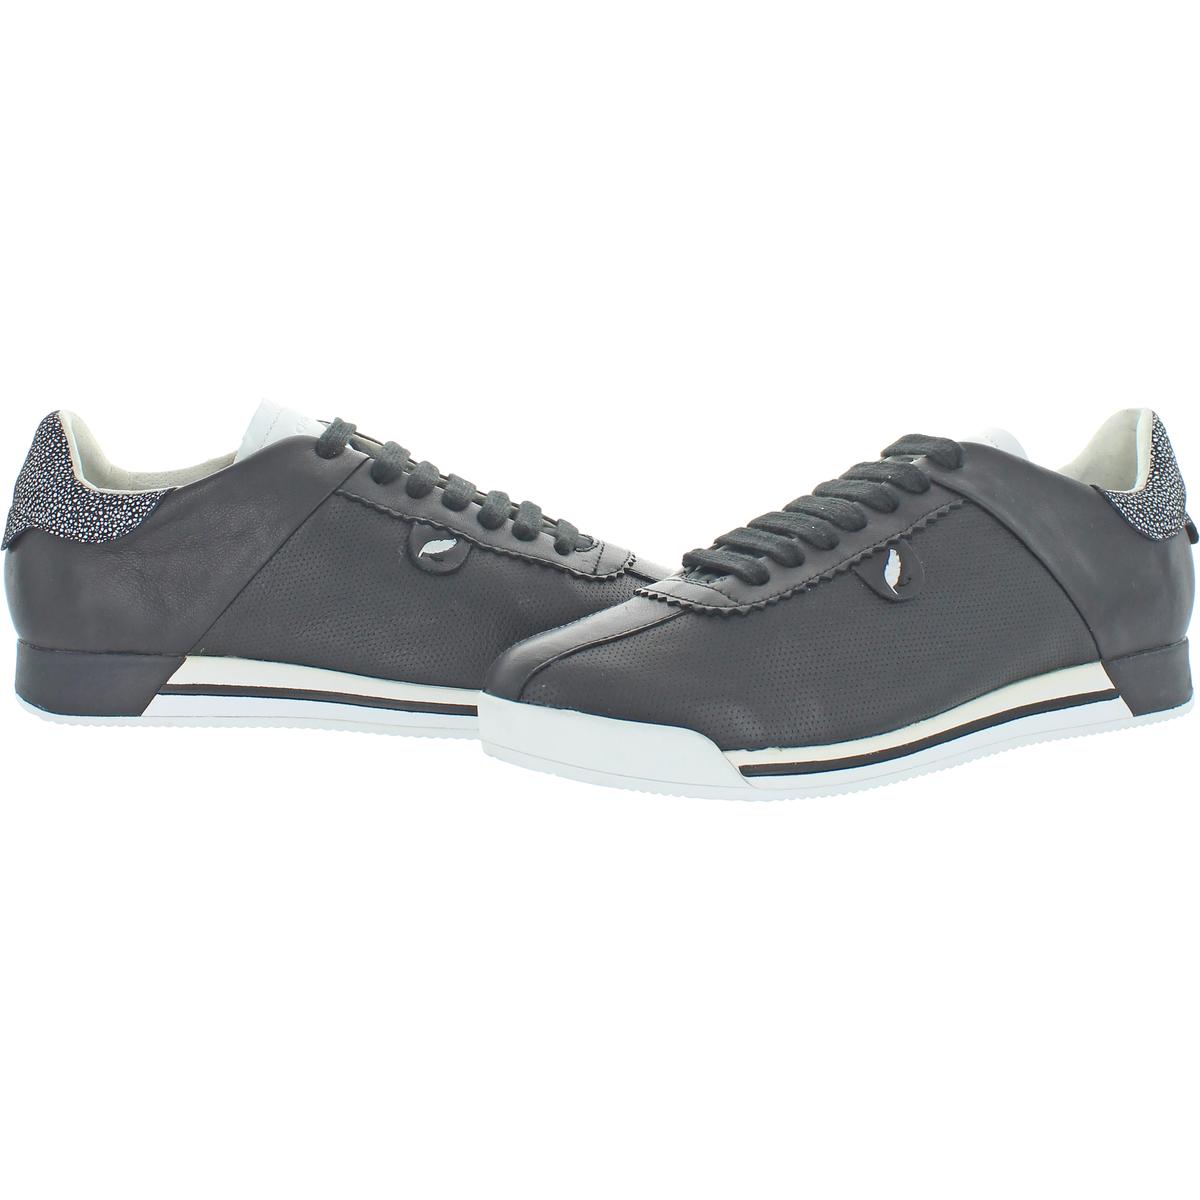 Geox Respira Womens Chewa Breathable Trainers Sneakers Shoes BHFO 3646 ...